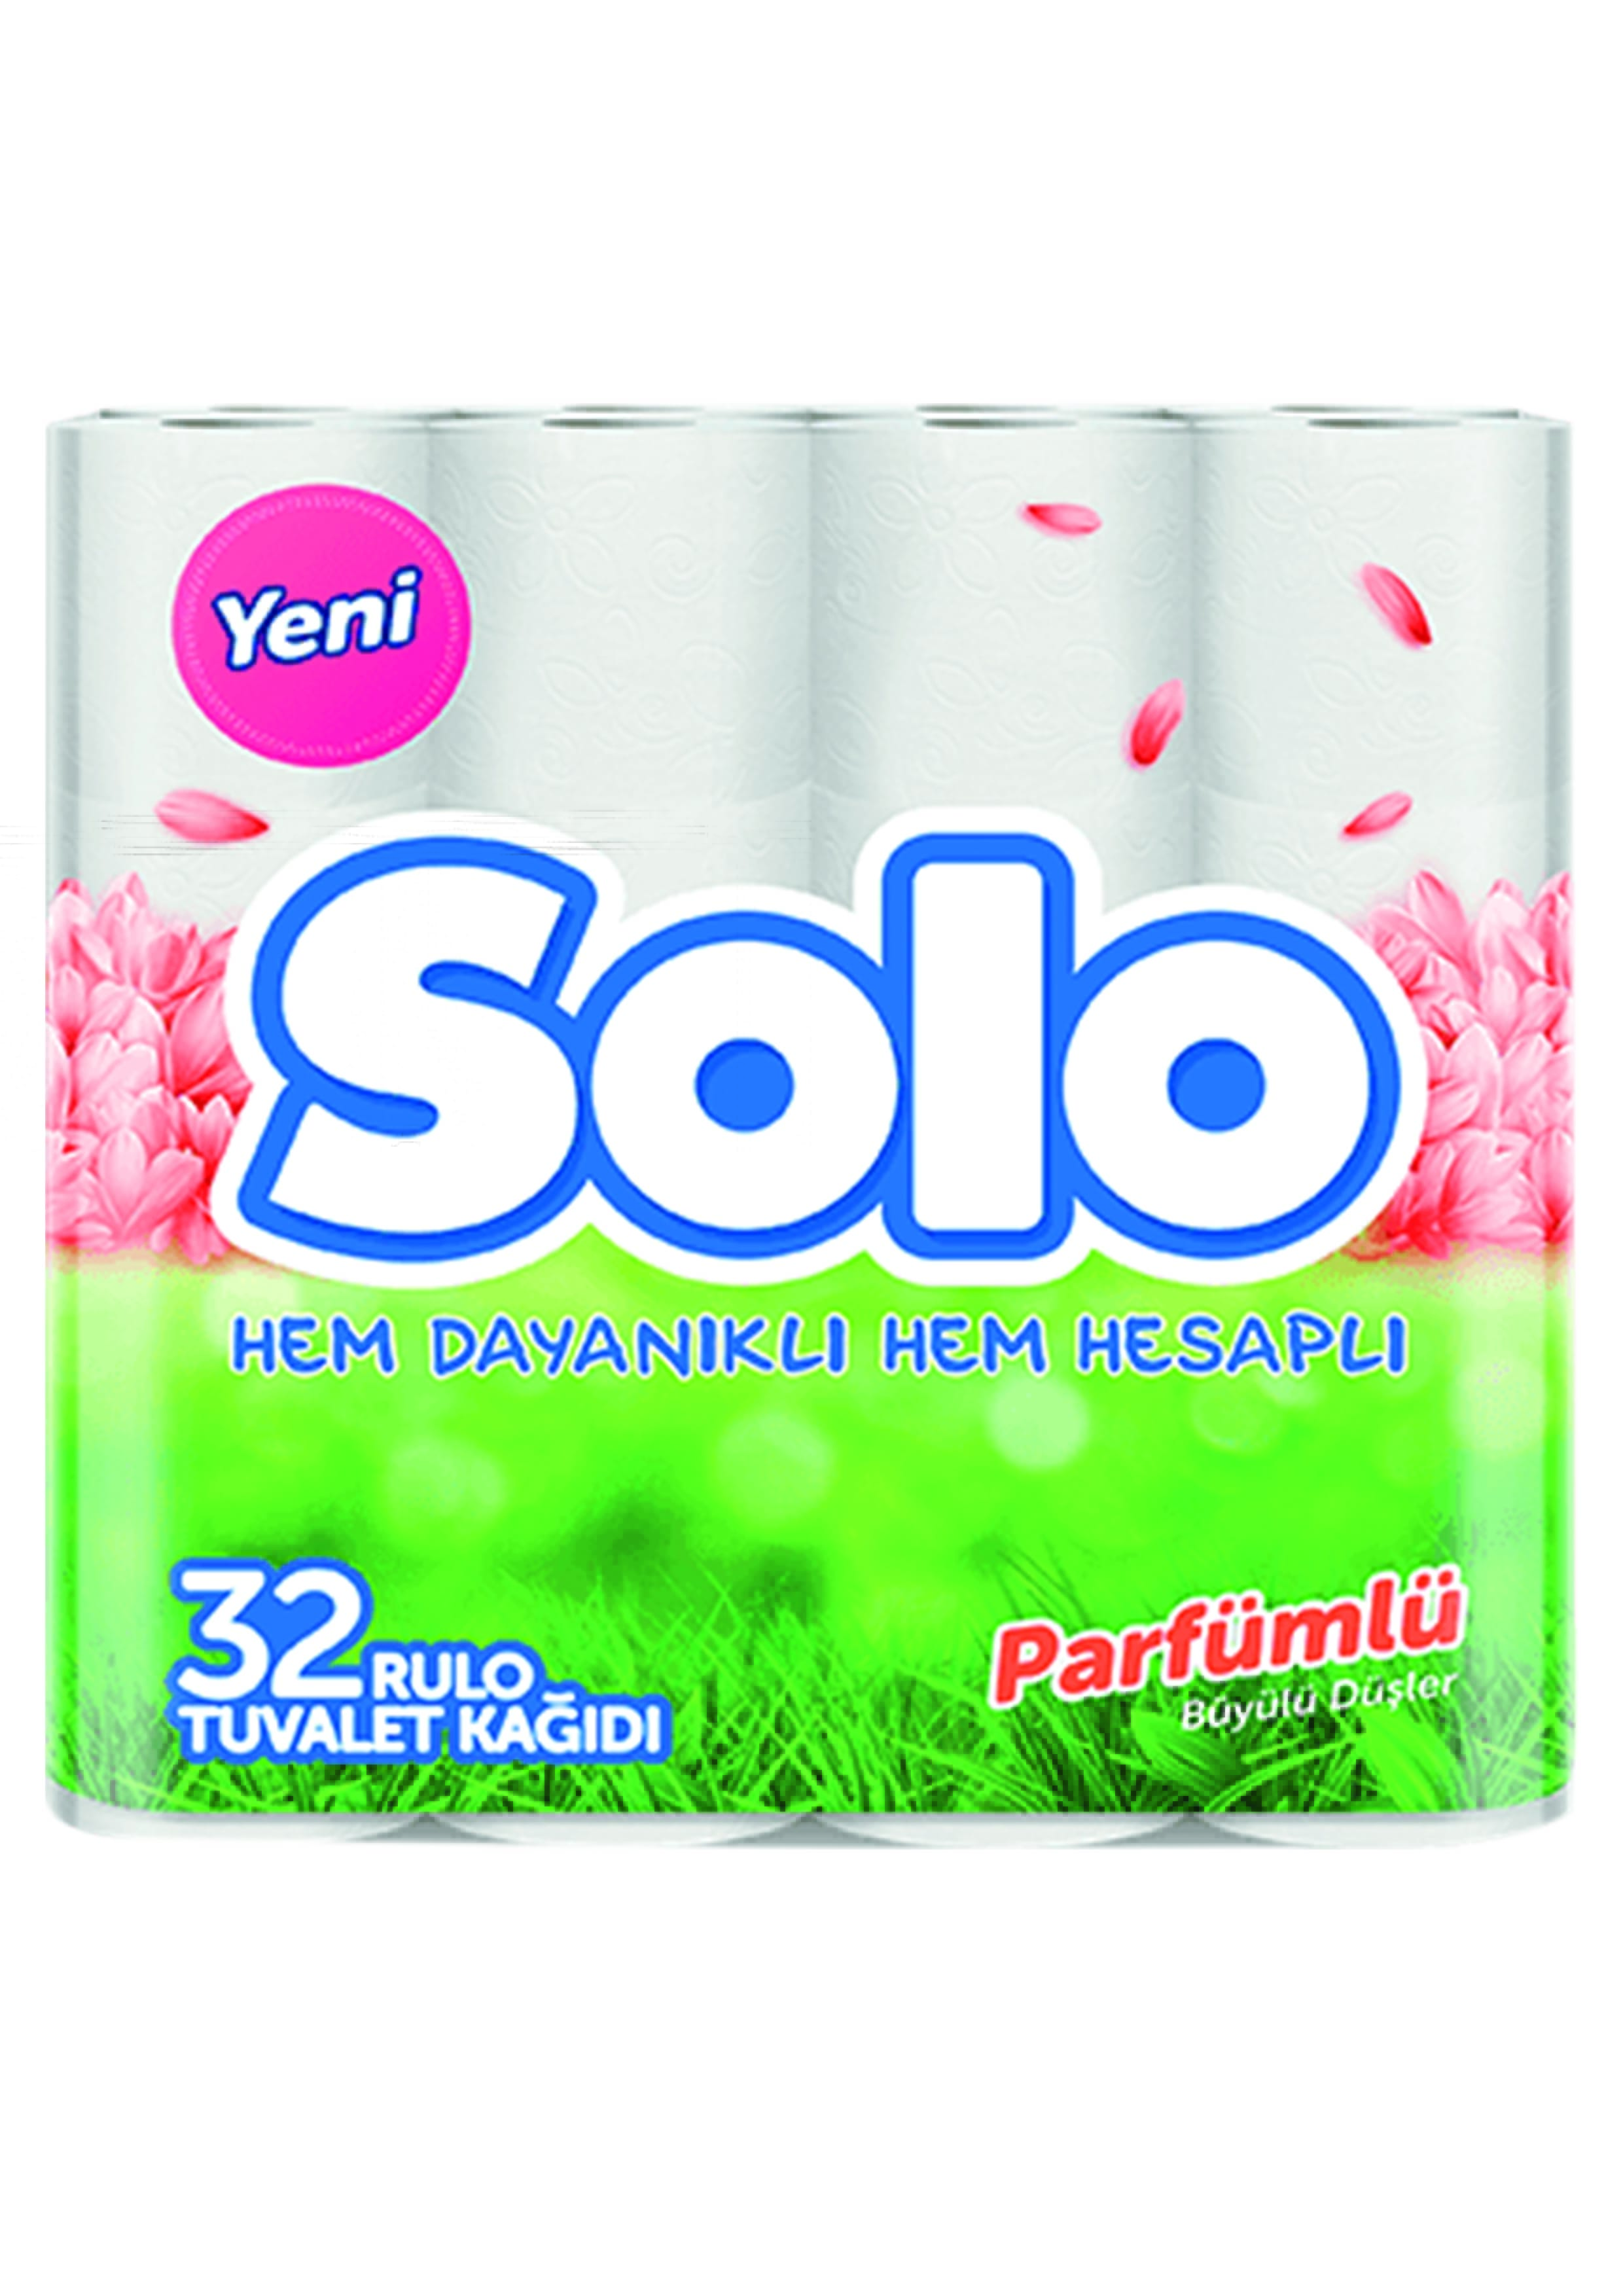 Solo Toilet Paper With Parfume 32 pc 